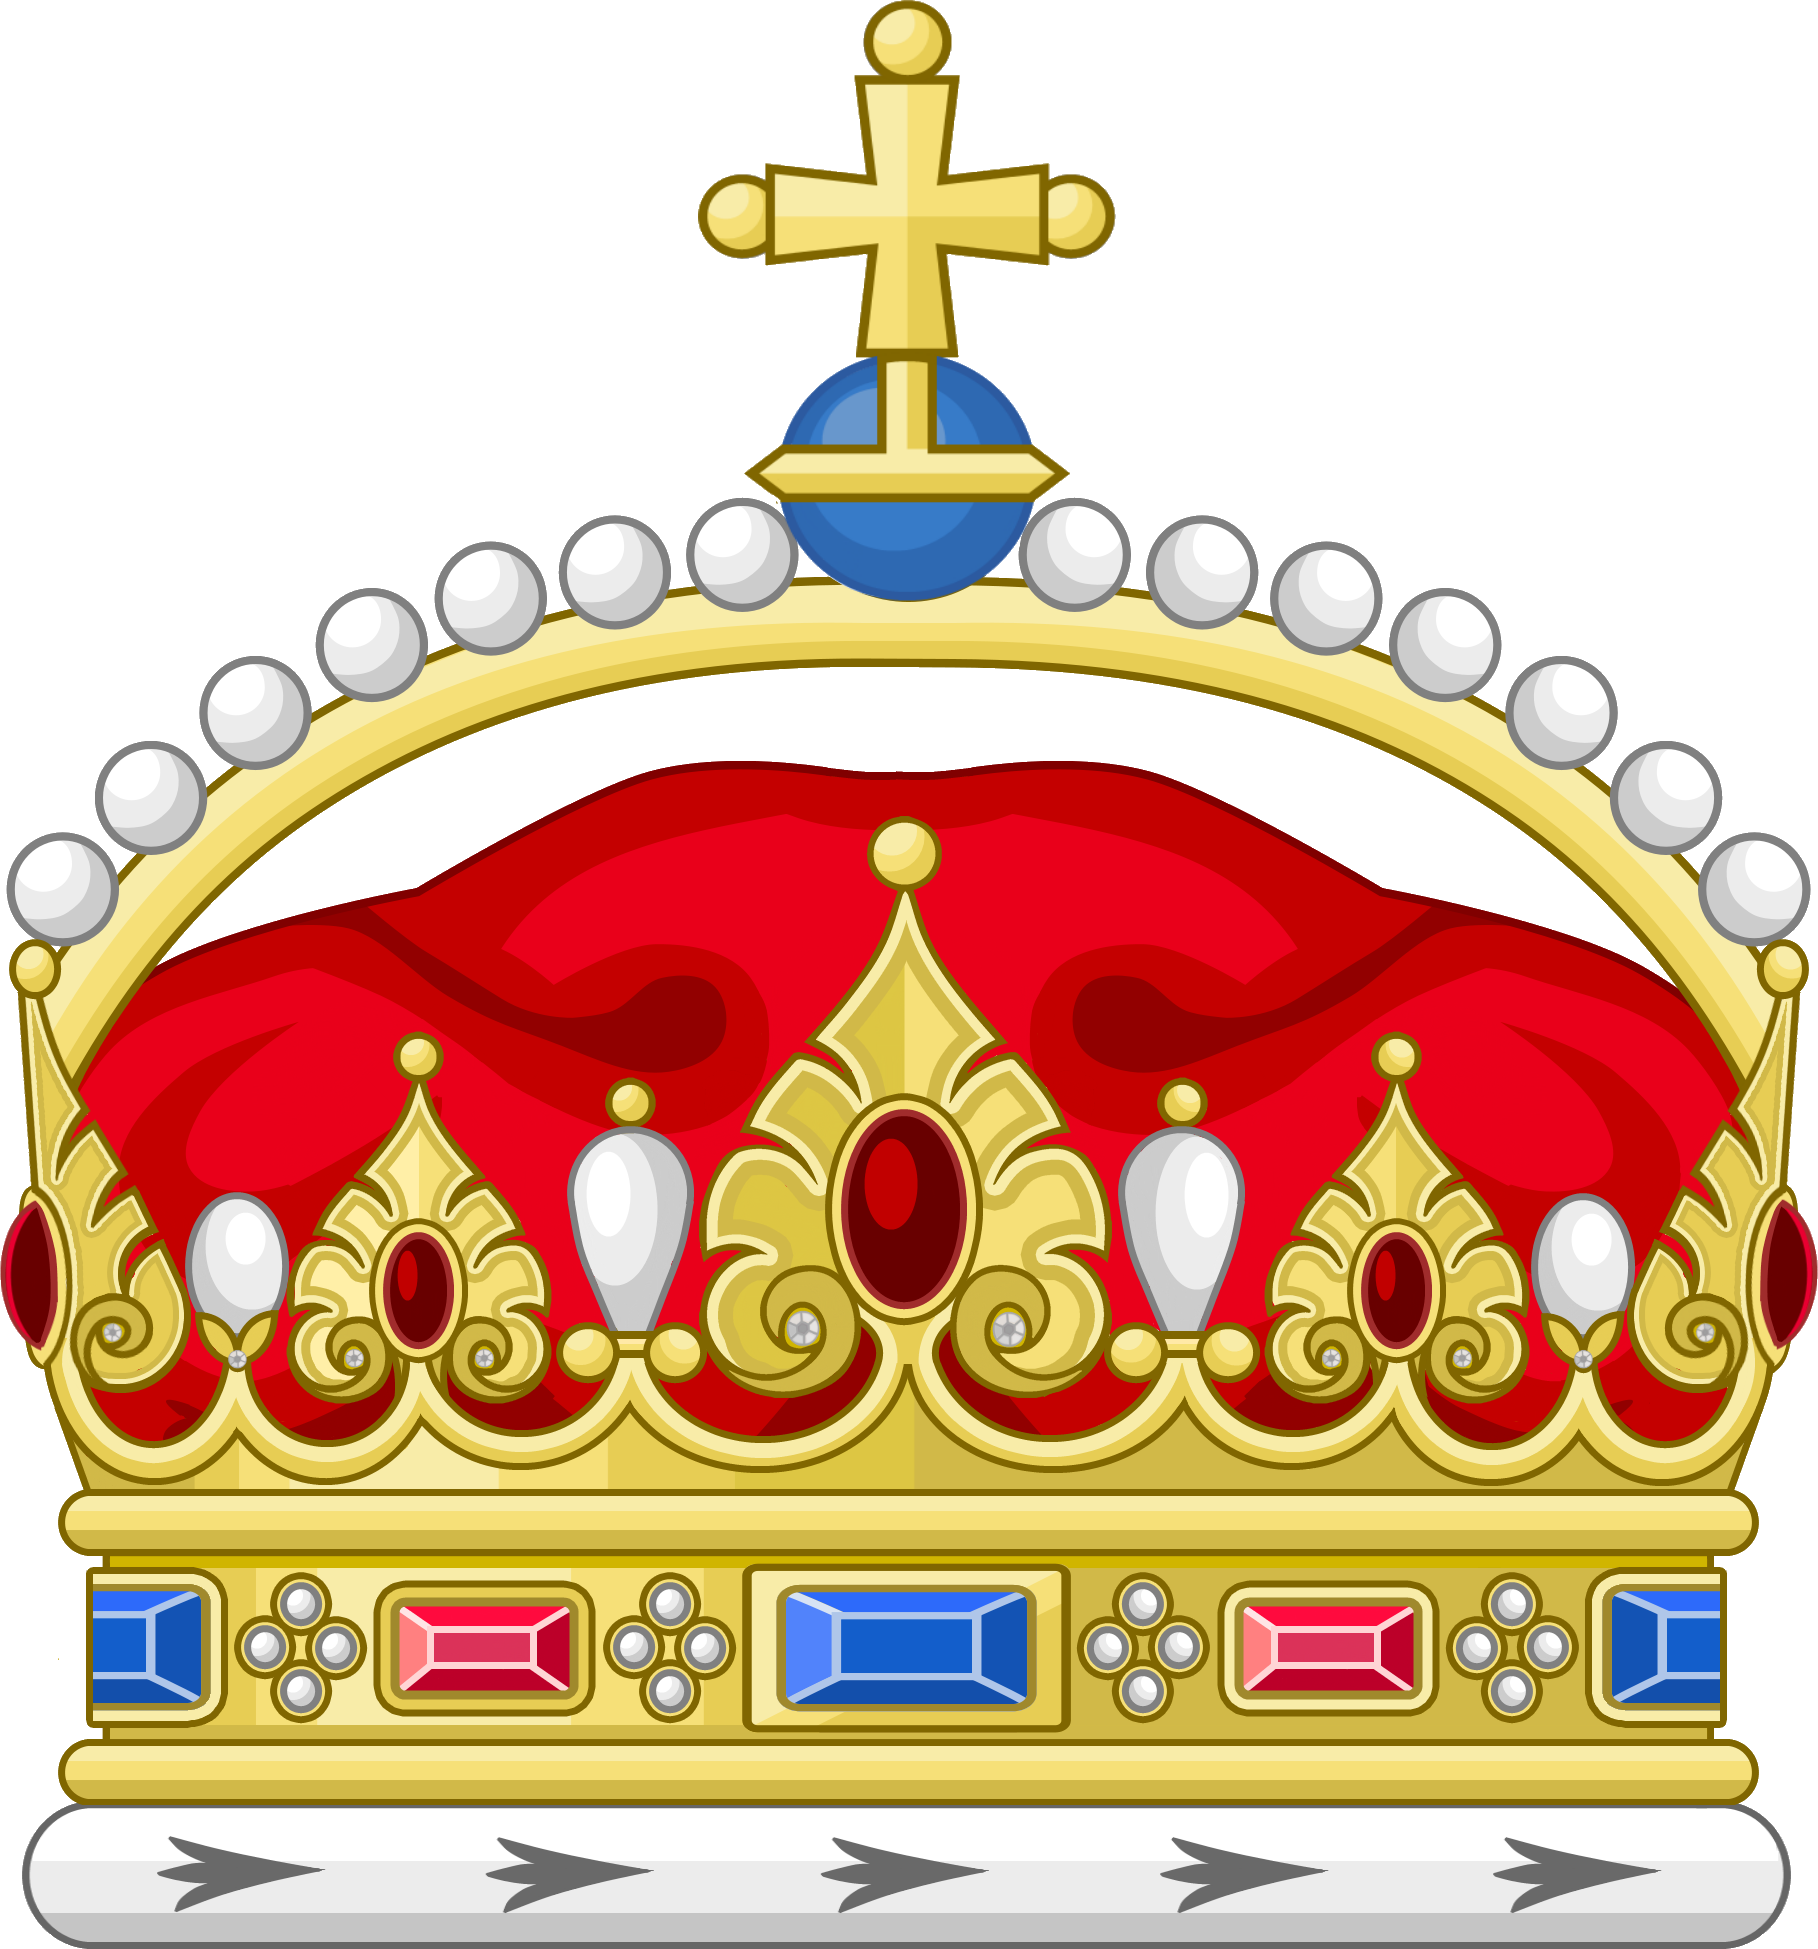 A Gold Crown With Red Cushion And Gemstones